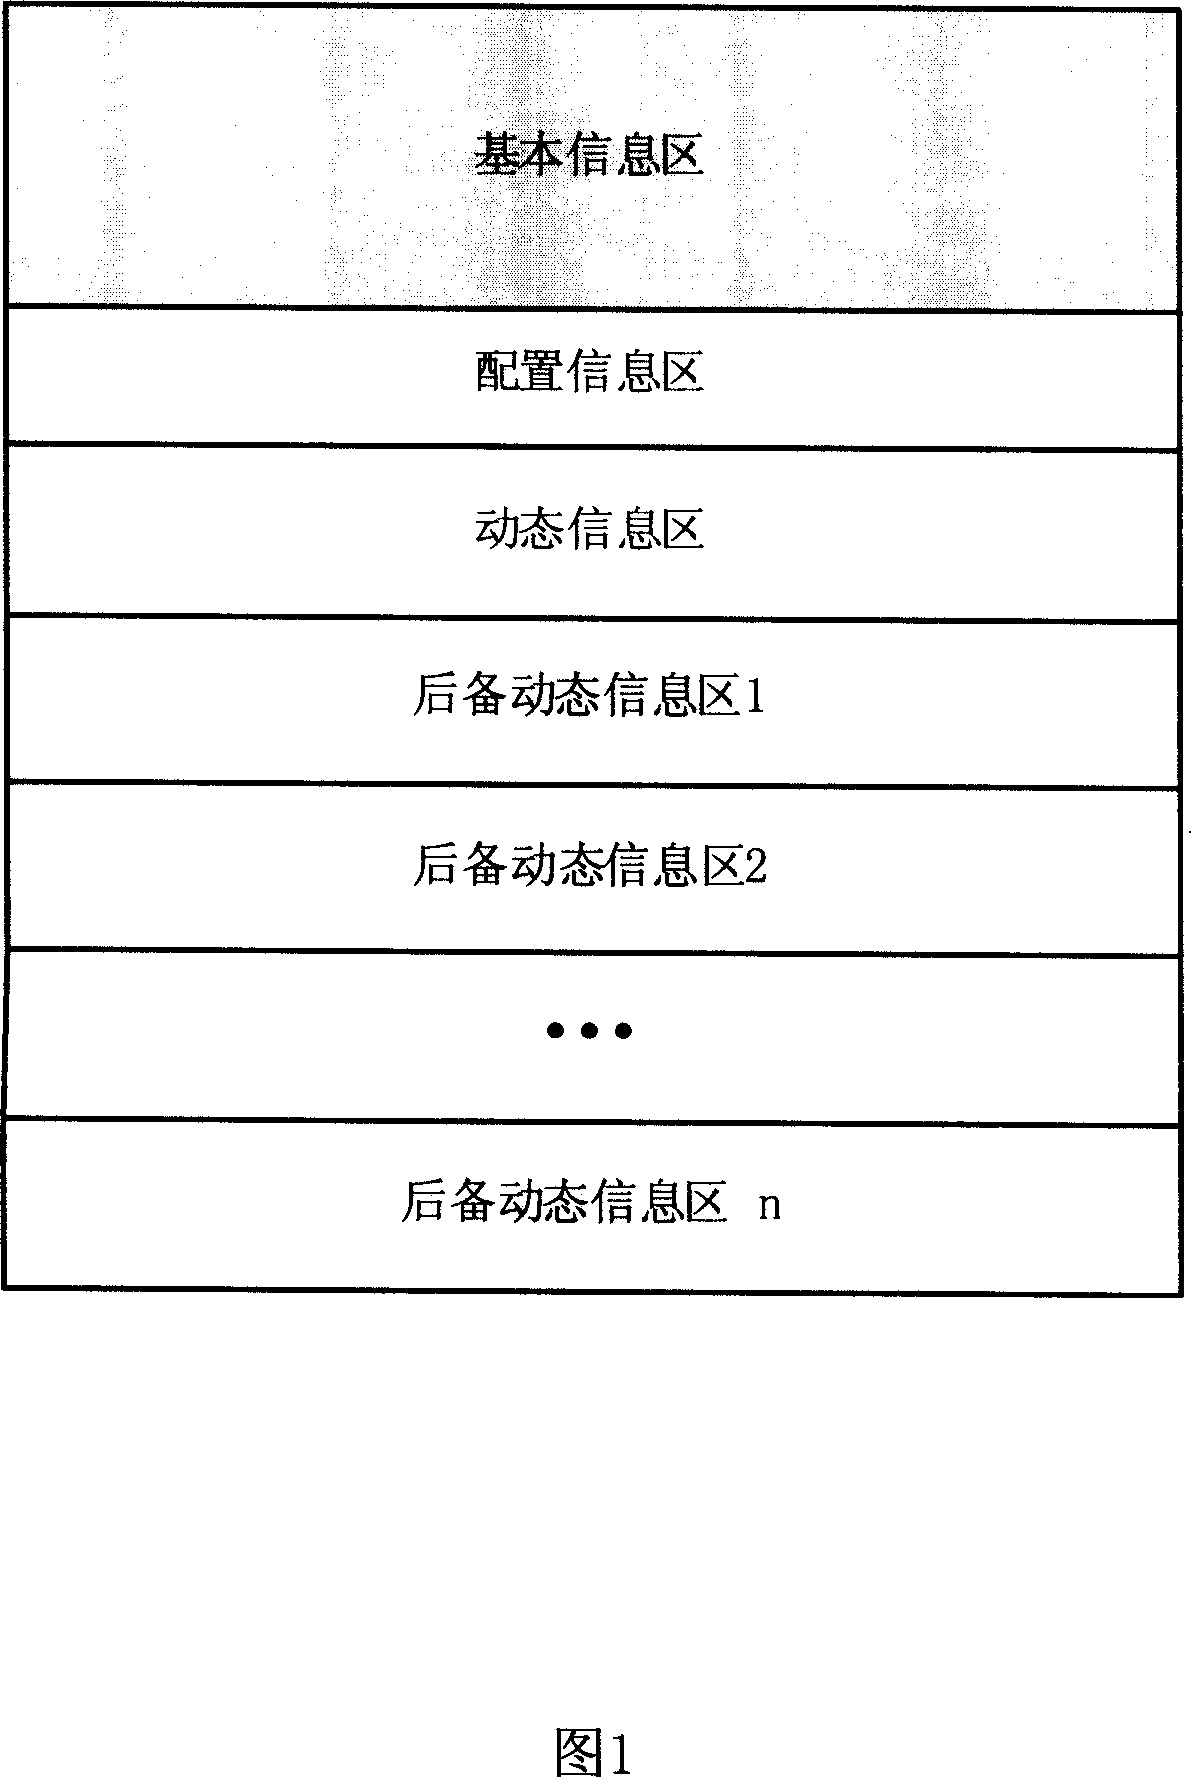 Method for reading and writing non-contact intelligent card data